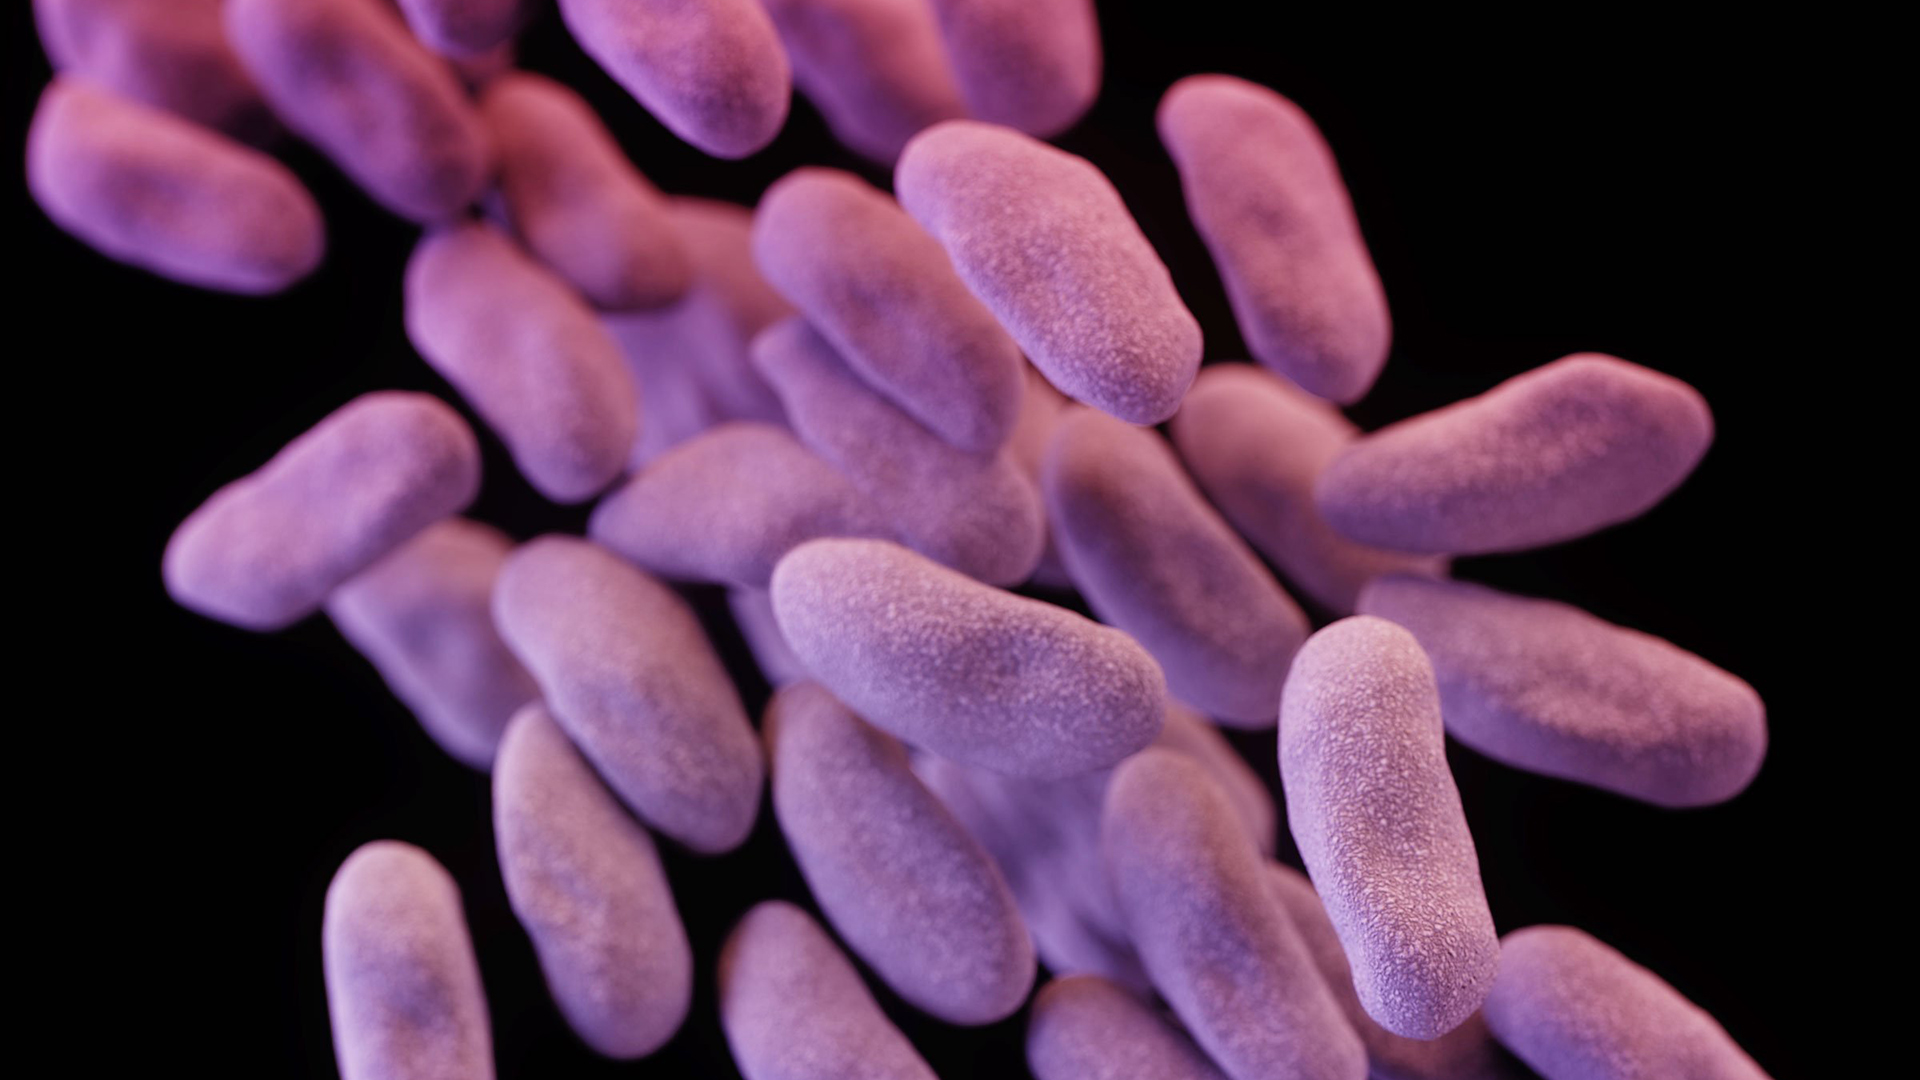 Nightmare bacteria' are trying to spread in the U.S., CDC says